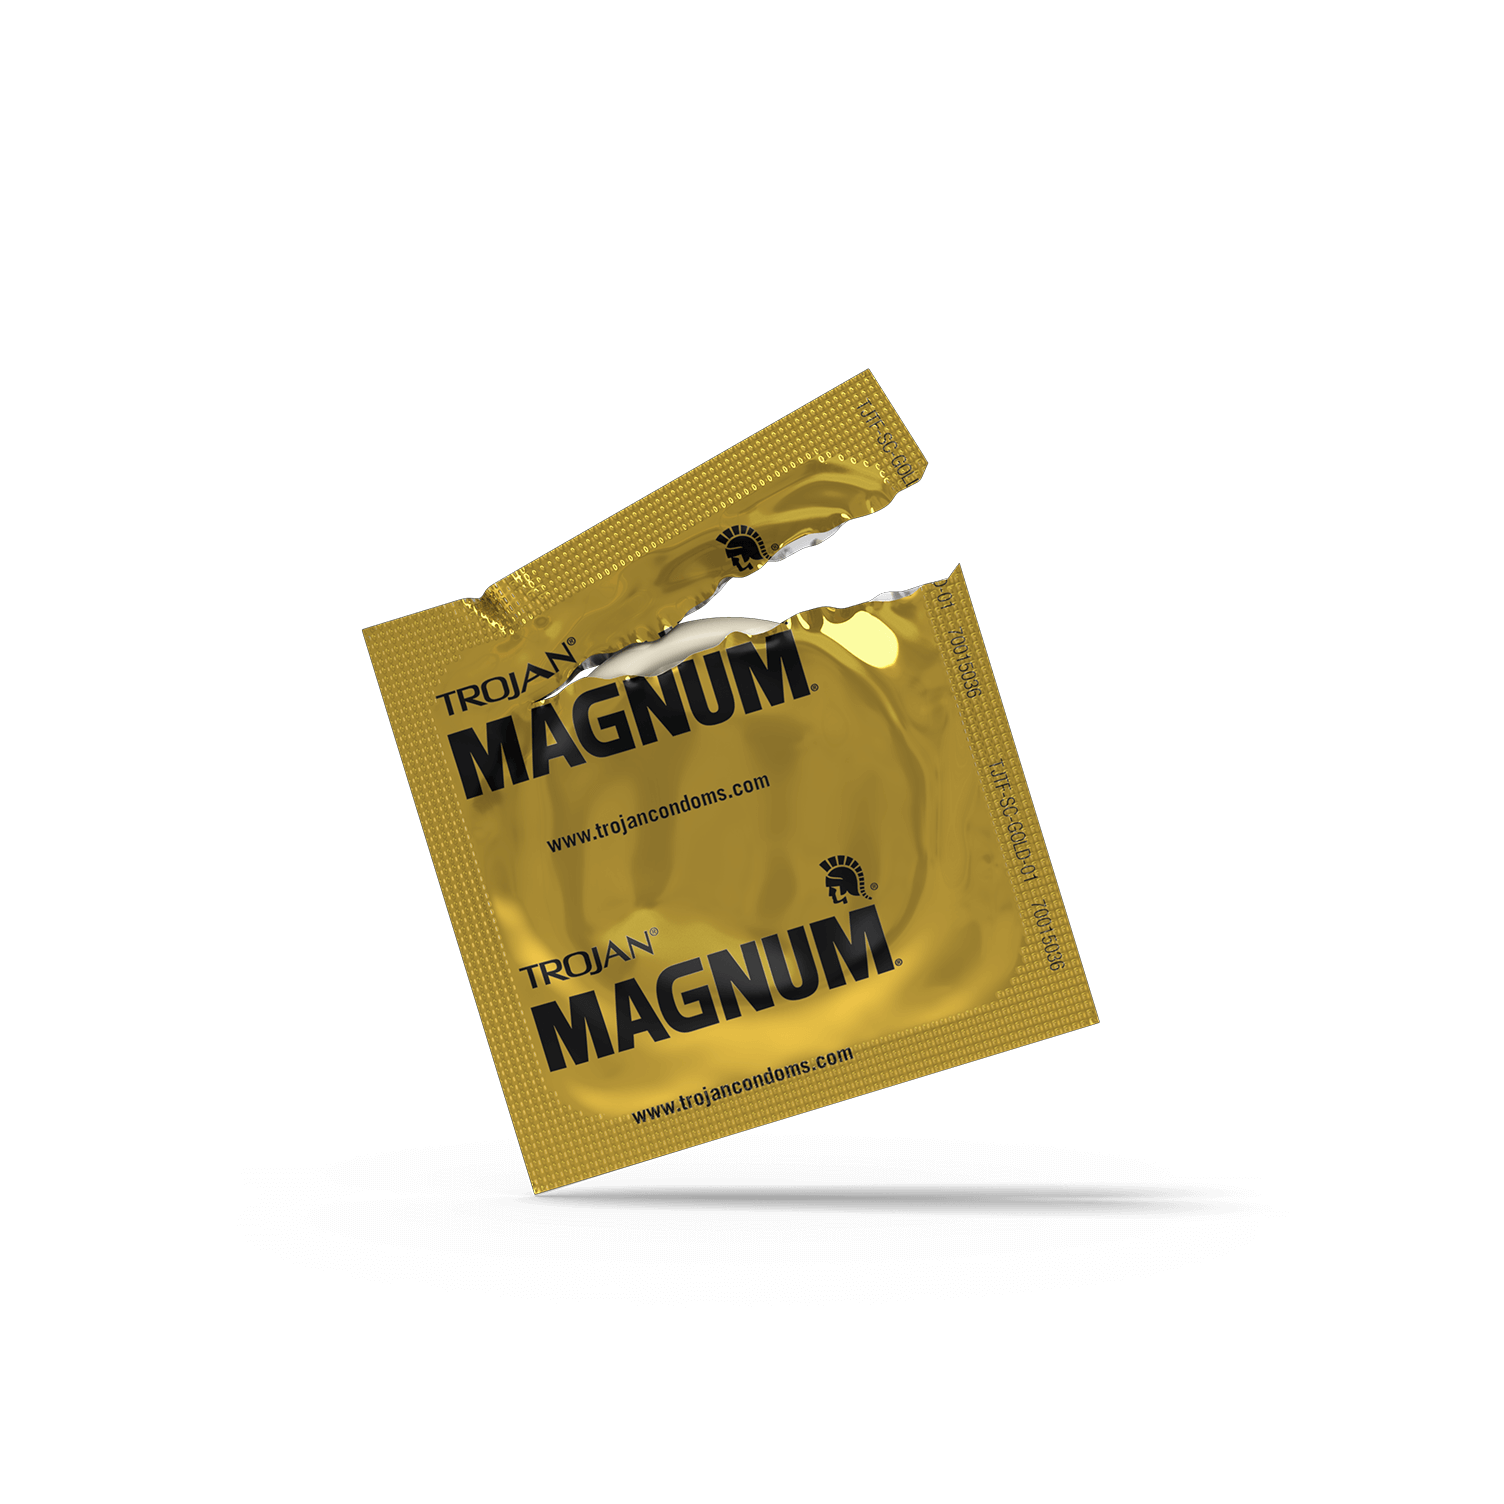 Magnum Large Sized Lubricated Condom gold wrapper.